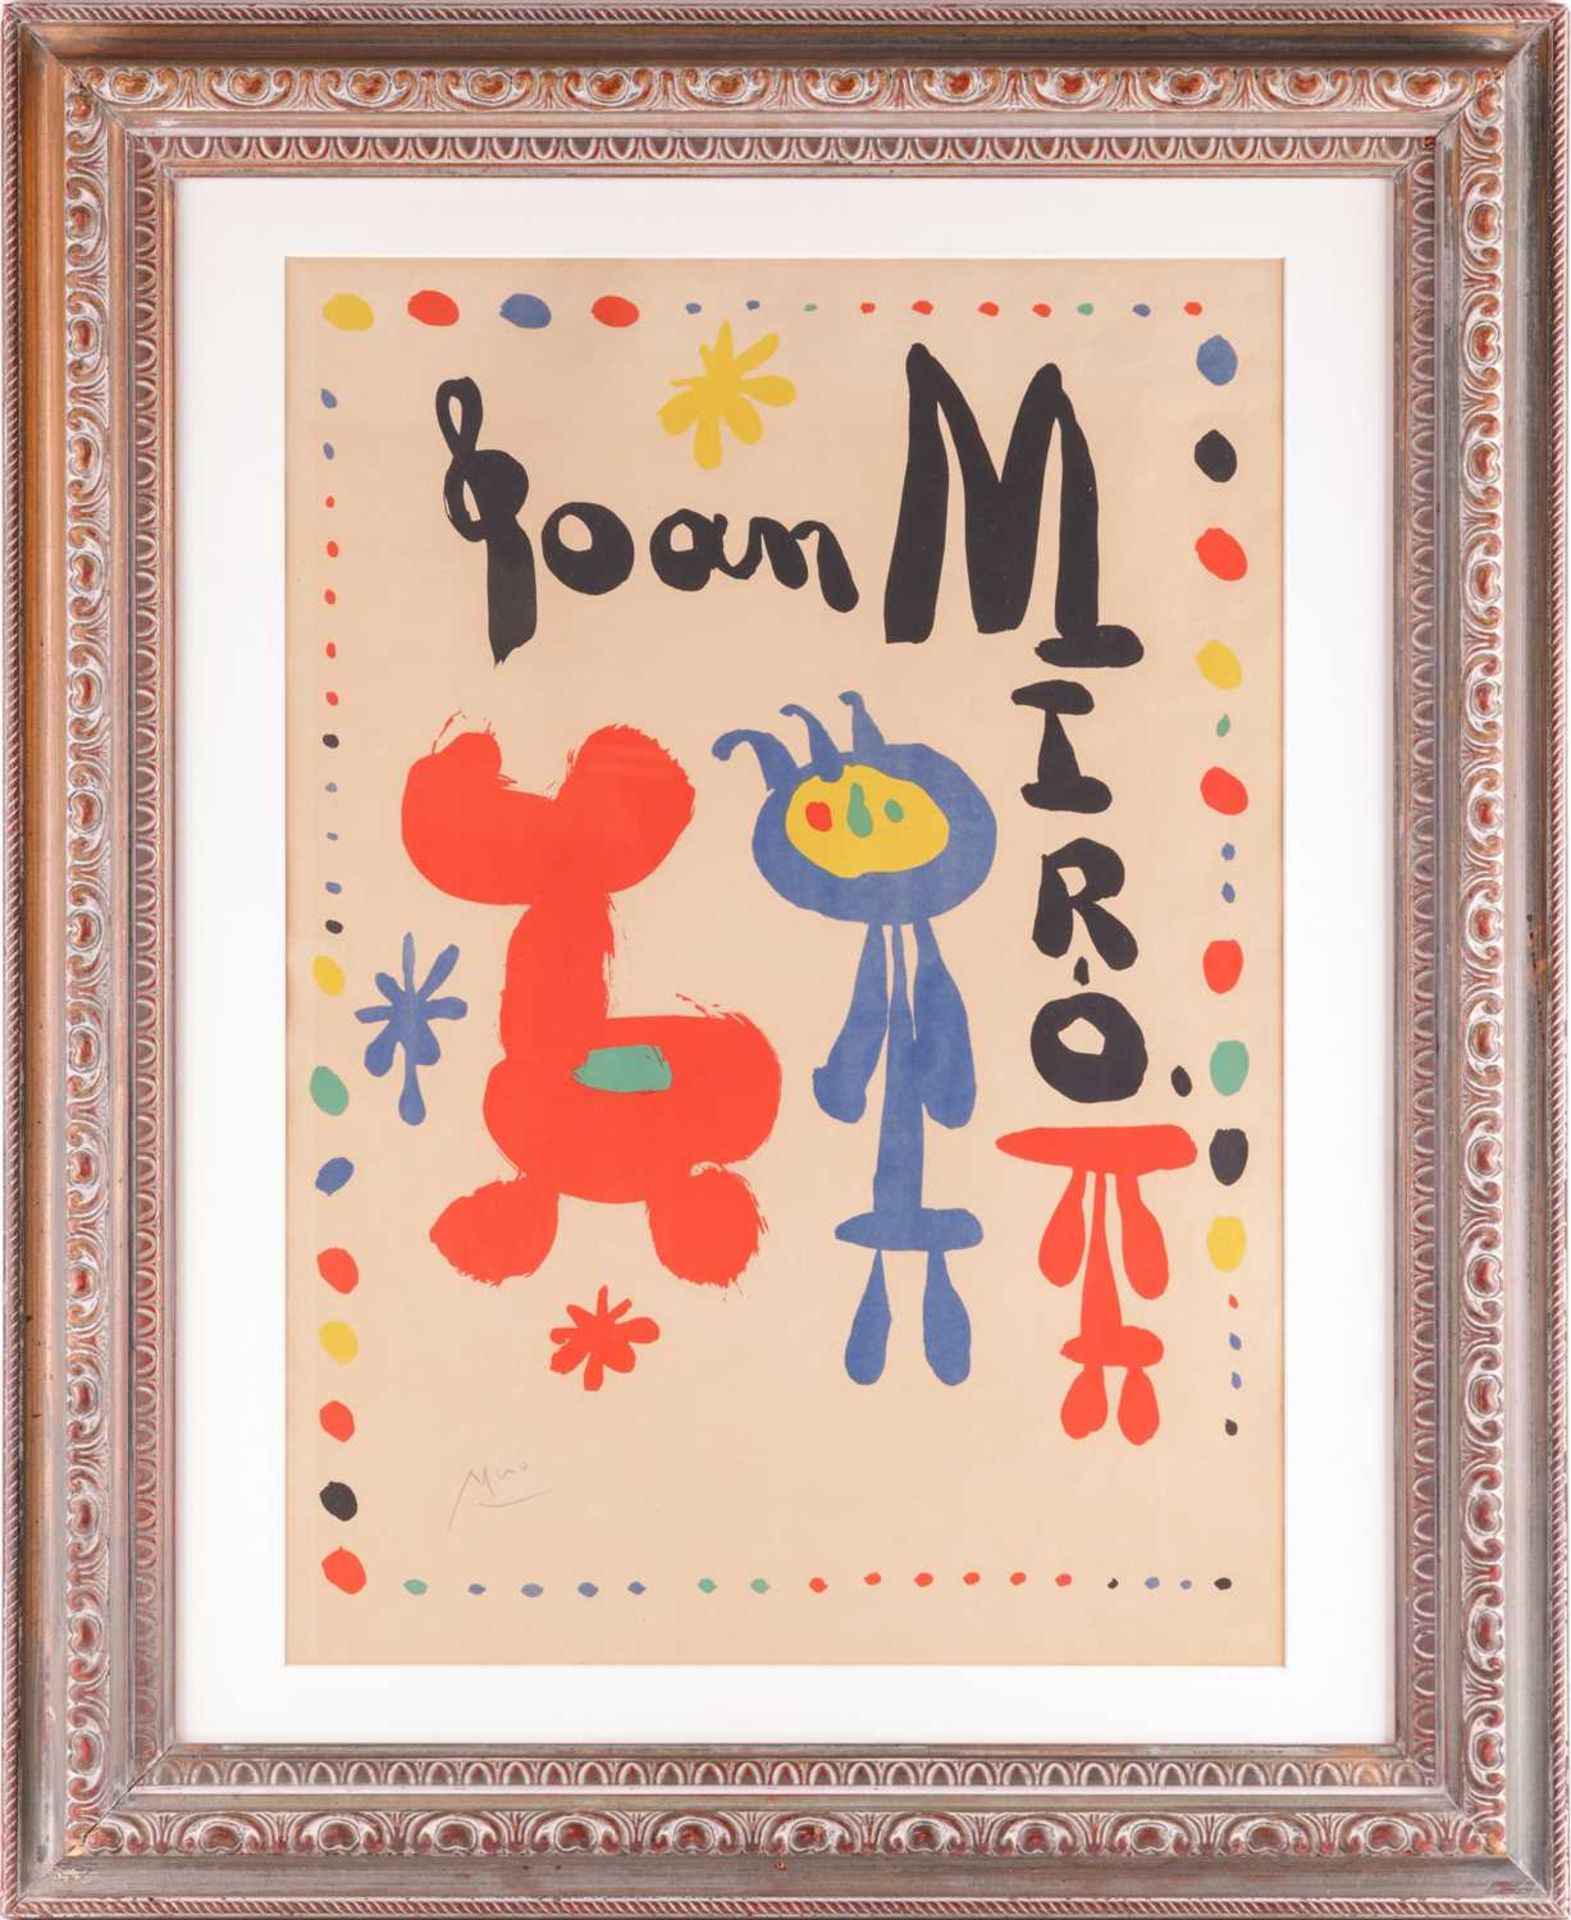 Joan Miro (Spanish, 1893 - 1983), Poster for Exhibition of 1948, signed in pencil (lower left), colo - Image 2 of 7